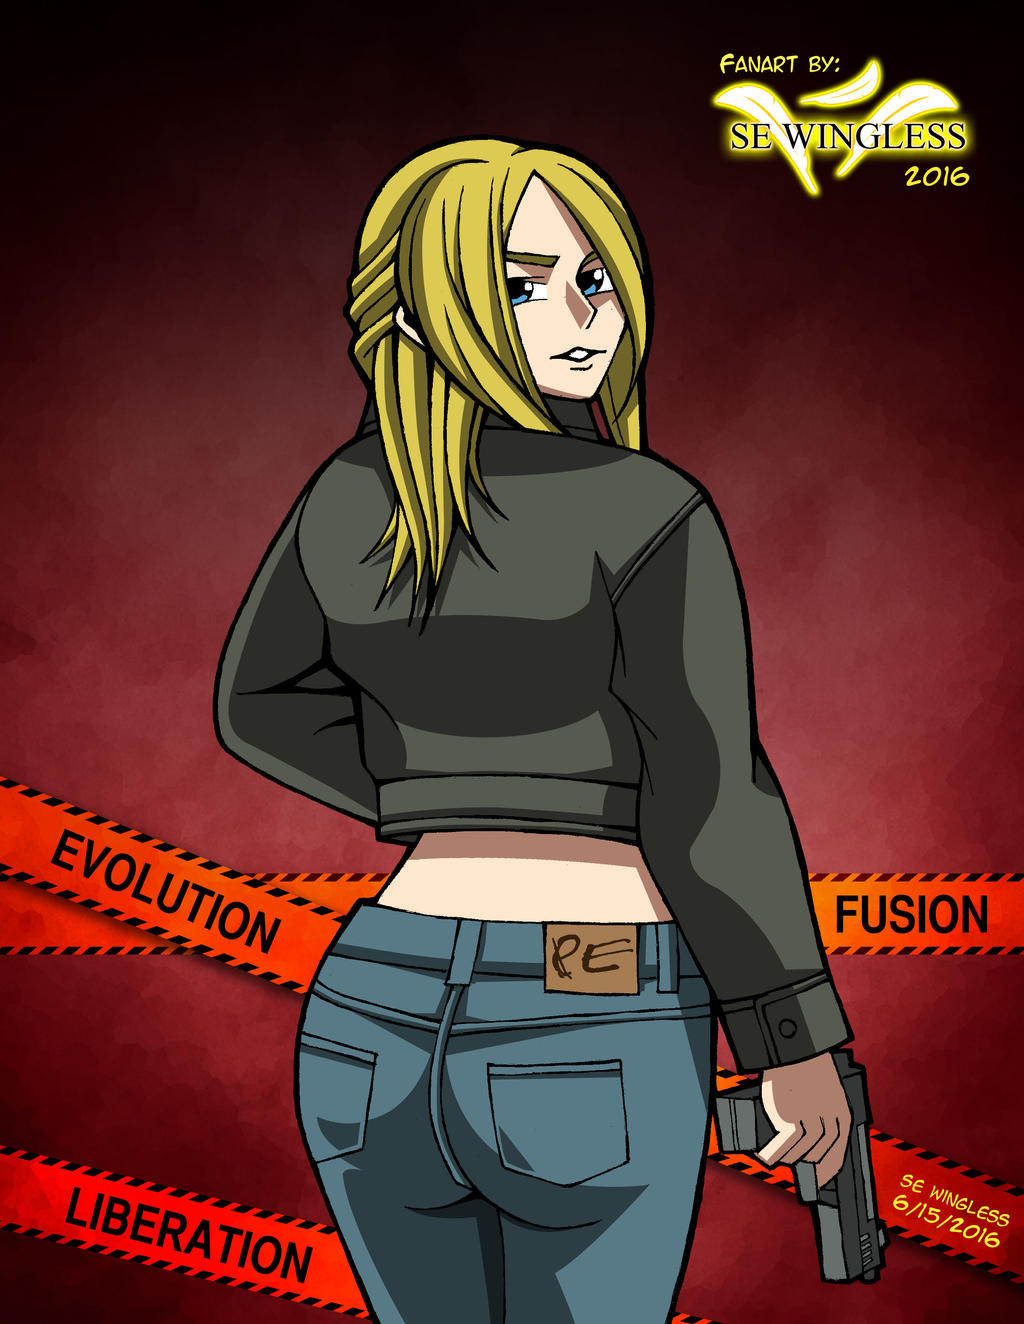 Parasite Eve gets a Remake by RazorClaw46 on DeviantArt